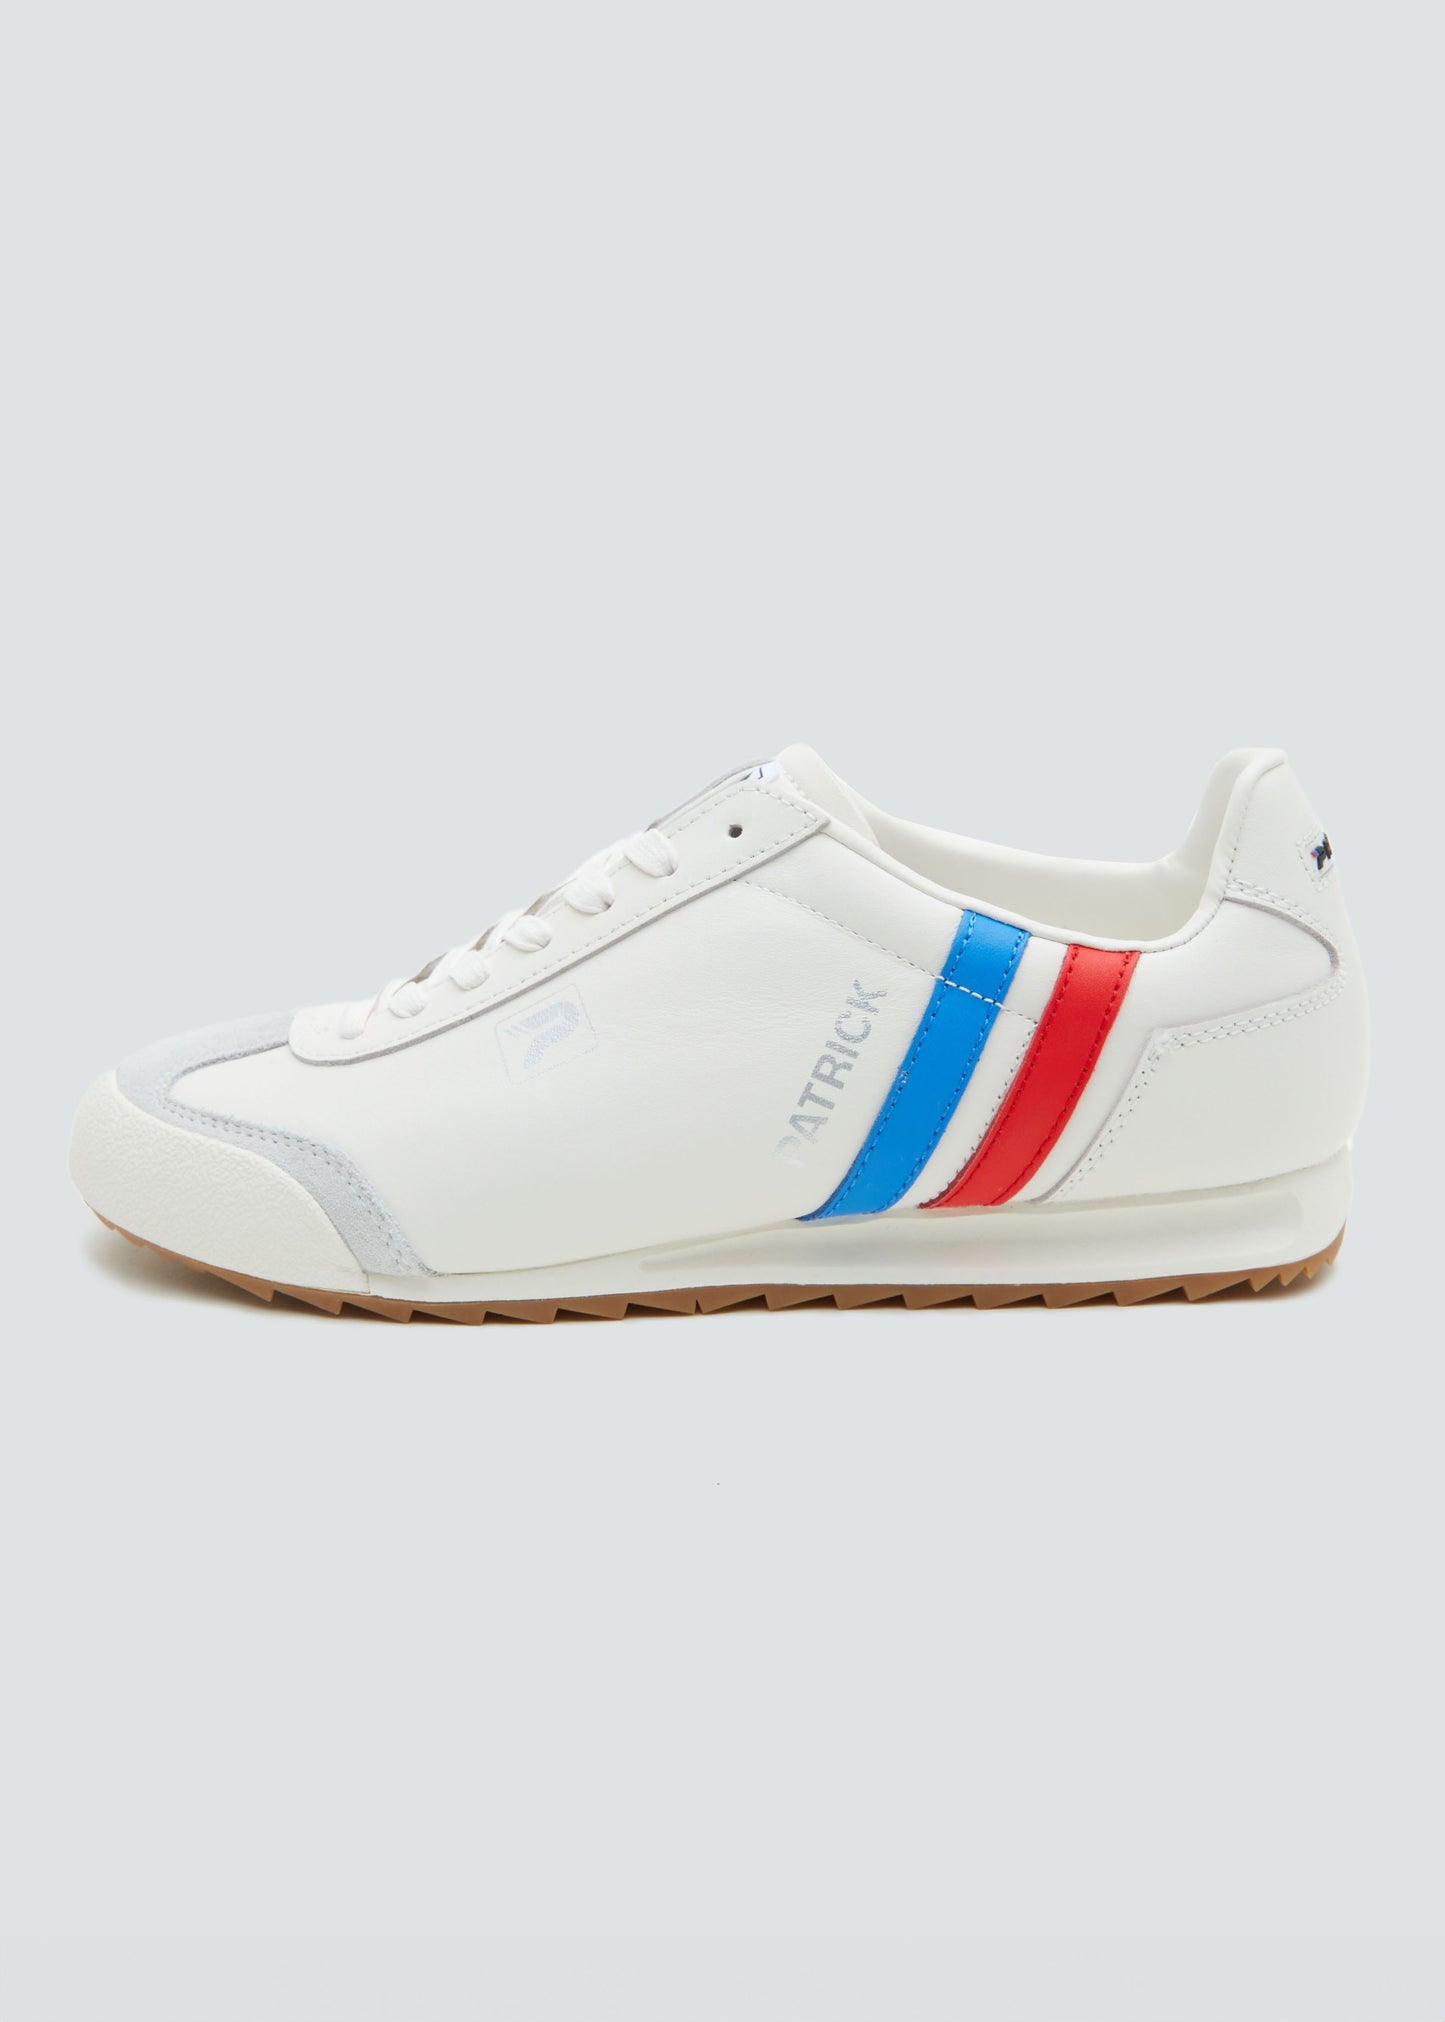 Patrick Liverpool Trainer - White/Blue/Red - Side